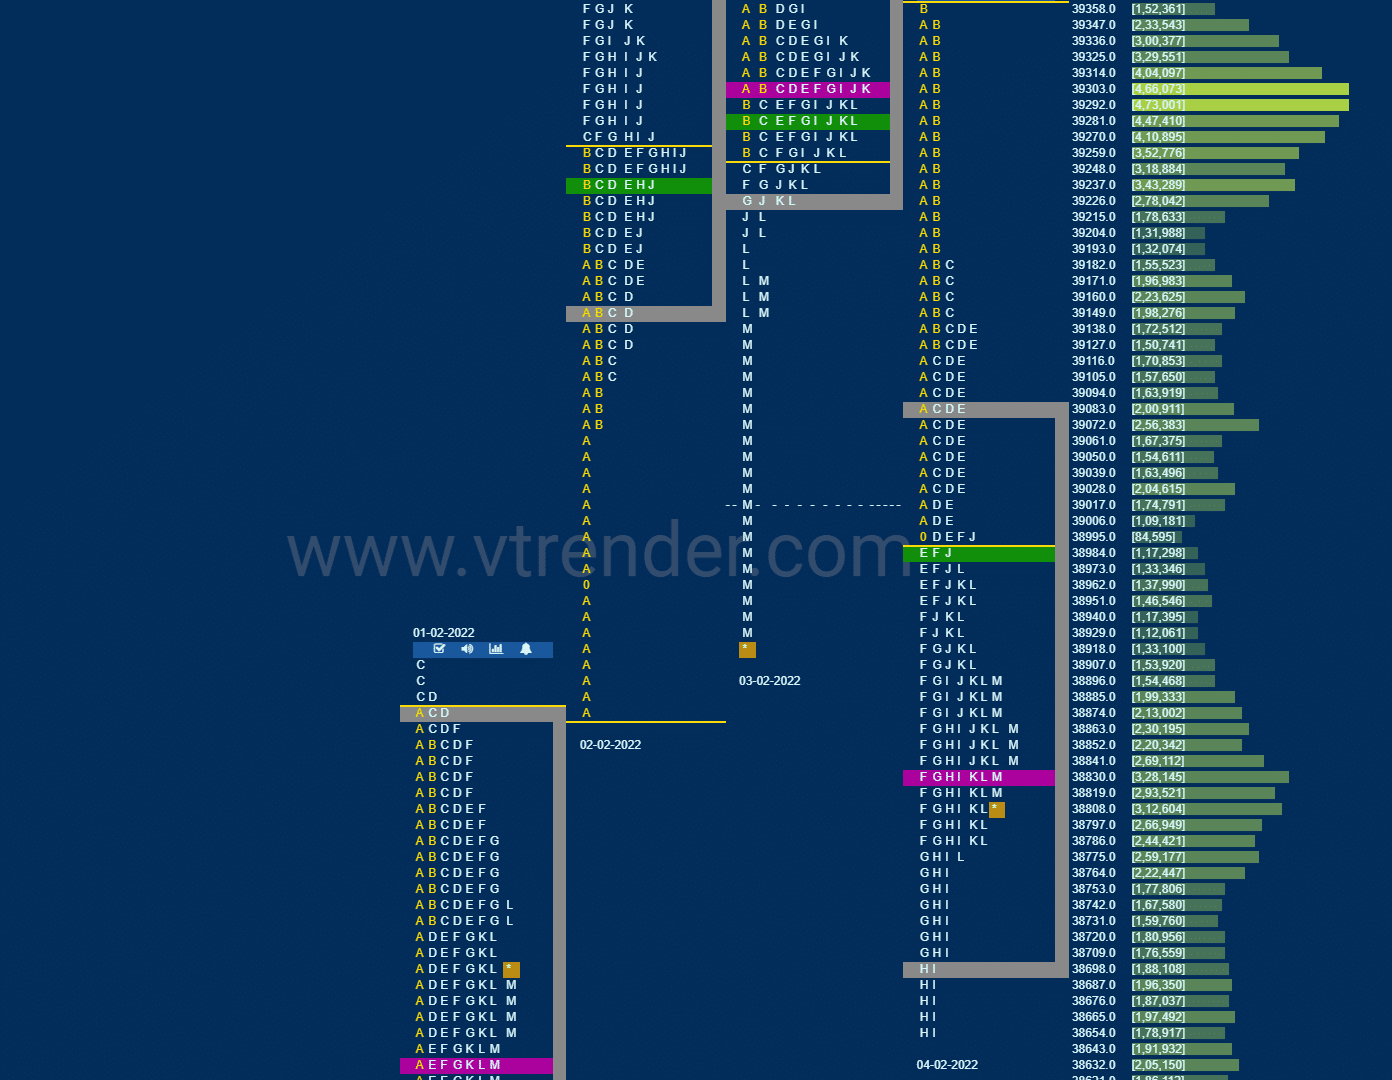 Bnf 3 Market Profile Analysis Dated 04Th February 2022 Banknifty Futures, Charts, Day Trading, Intraday Trading, Intraday Trading Strategies, Market Profile, Market Profile Trading Strategies, Nifty Futures, Order Flow Analysis, Support And Resistance, Technical Analysis, Trading Strategies, Volume Profile Trading